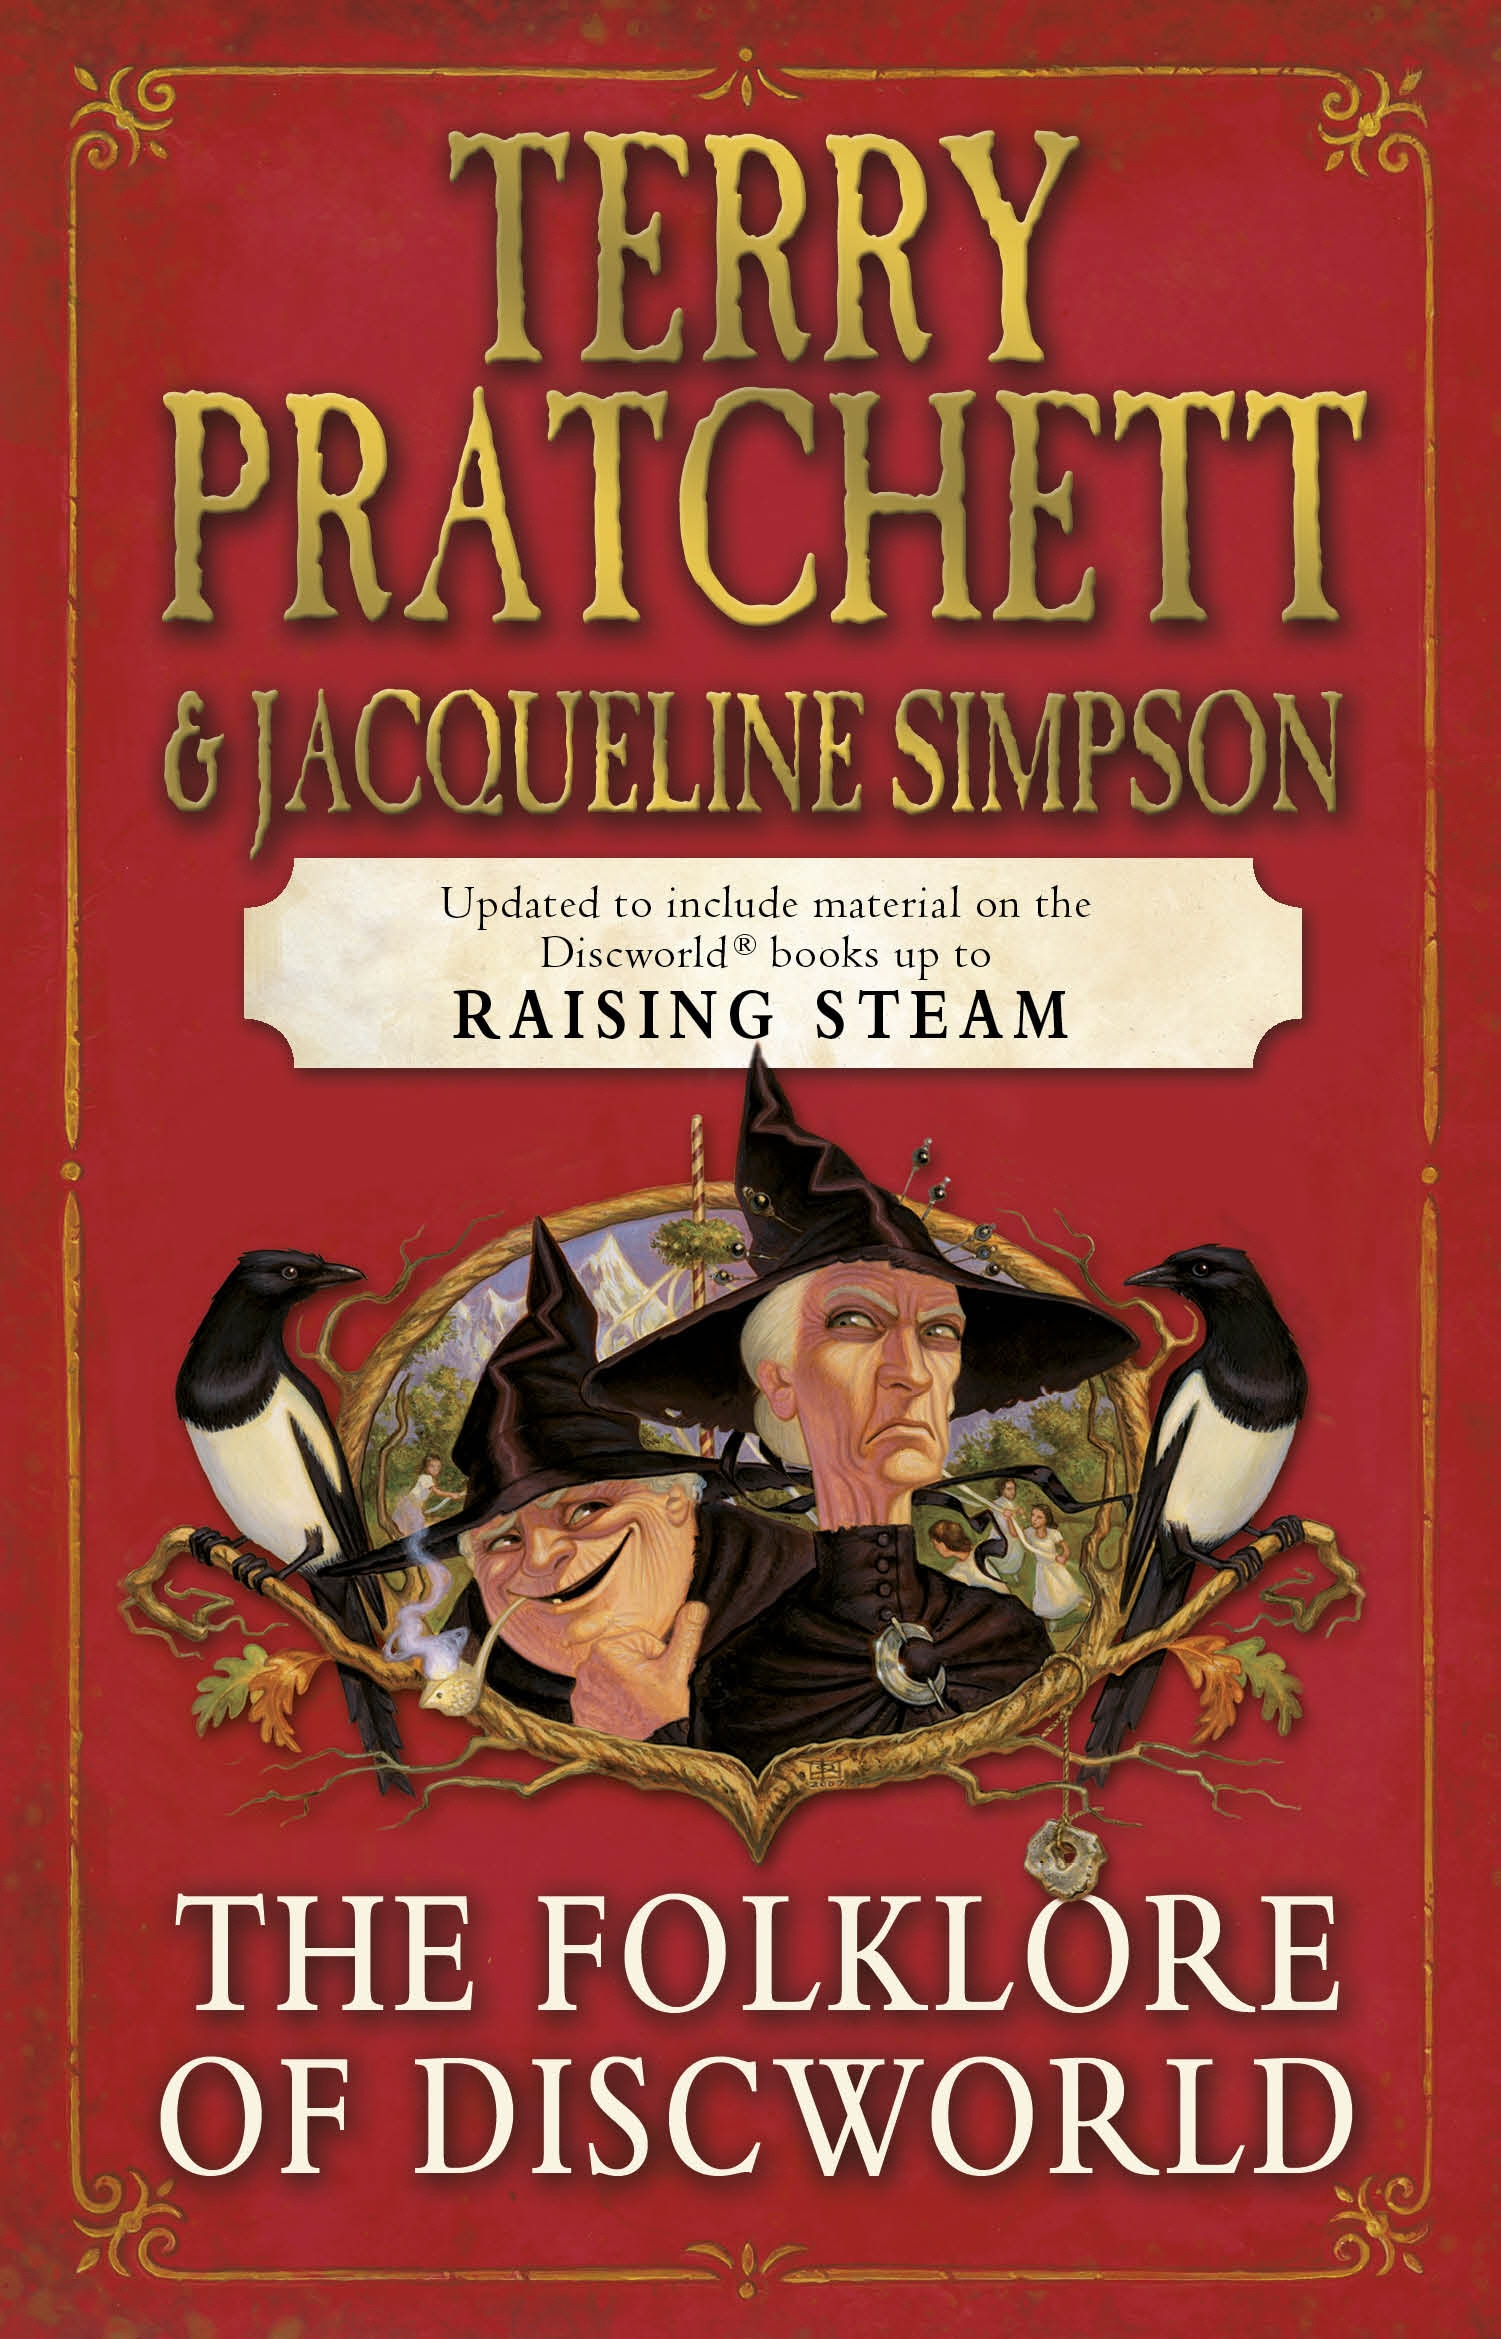 Book “The Folklore of Discworld” by Terry Pratchett, Jacqueline Simpson — October 8, 2009